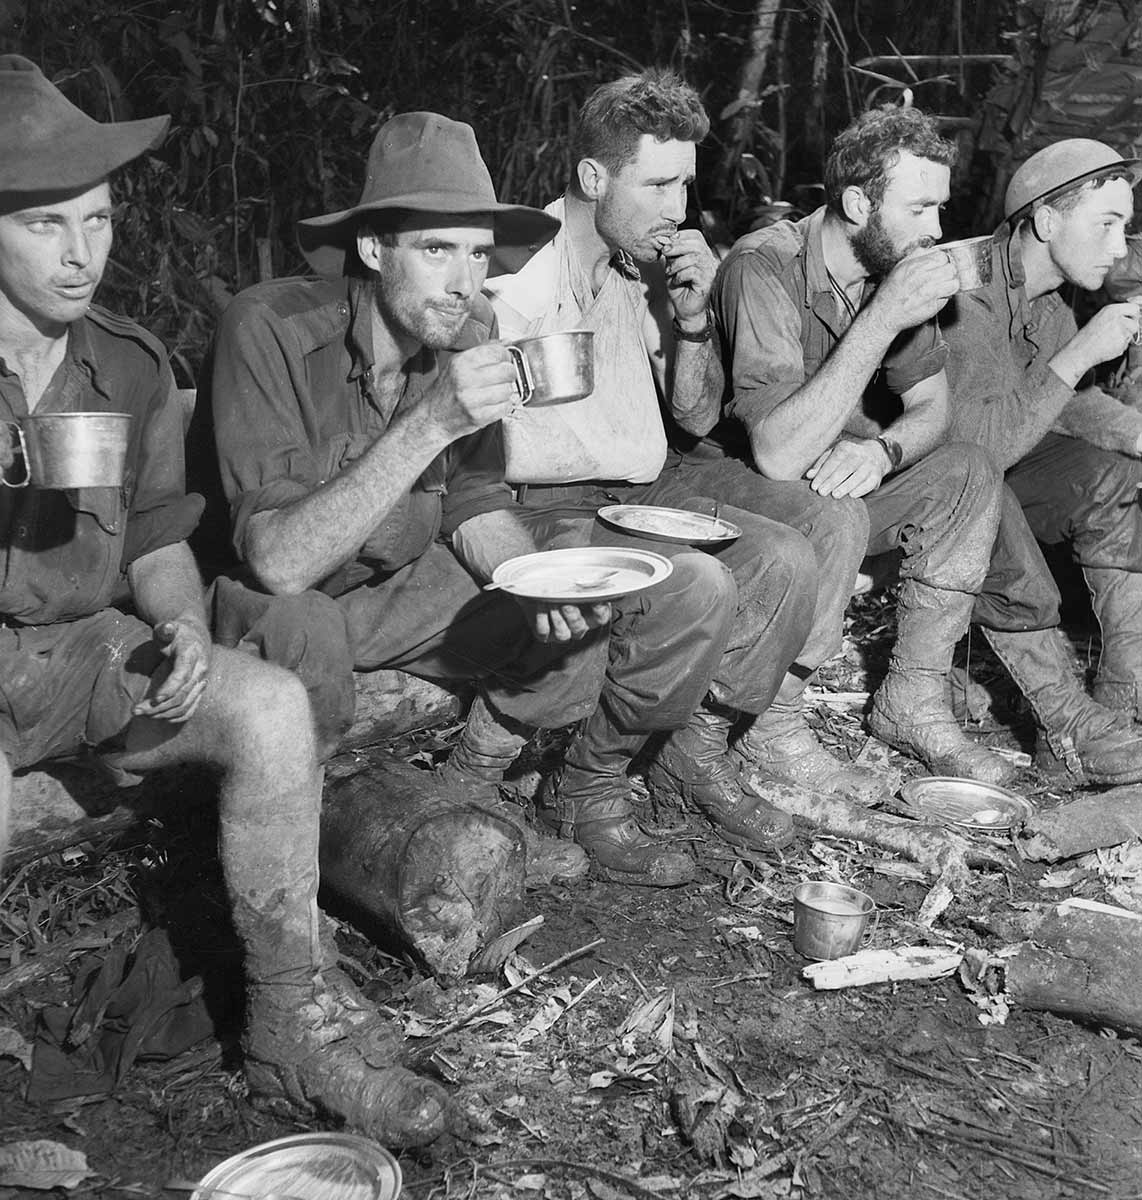 Black and white photograph of Australian soldiers resting. They are sitting on a log and eating and drinking. One of the soldiers' arm is in a slingshot.